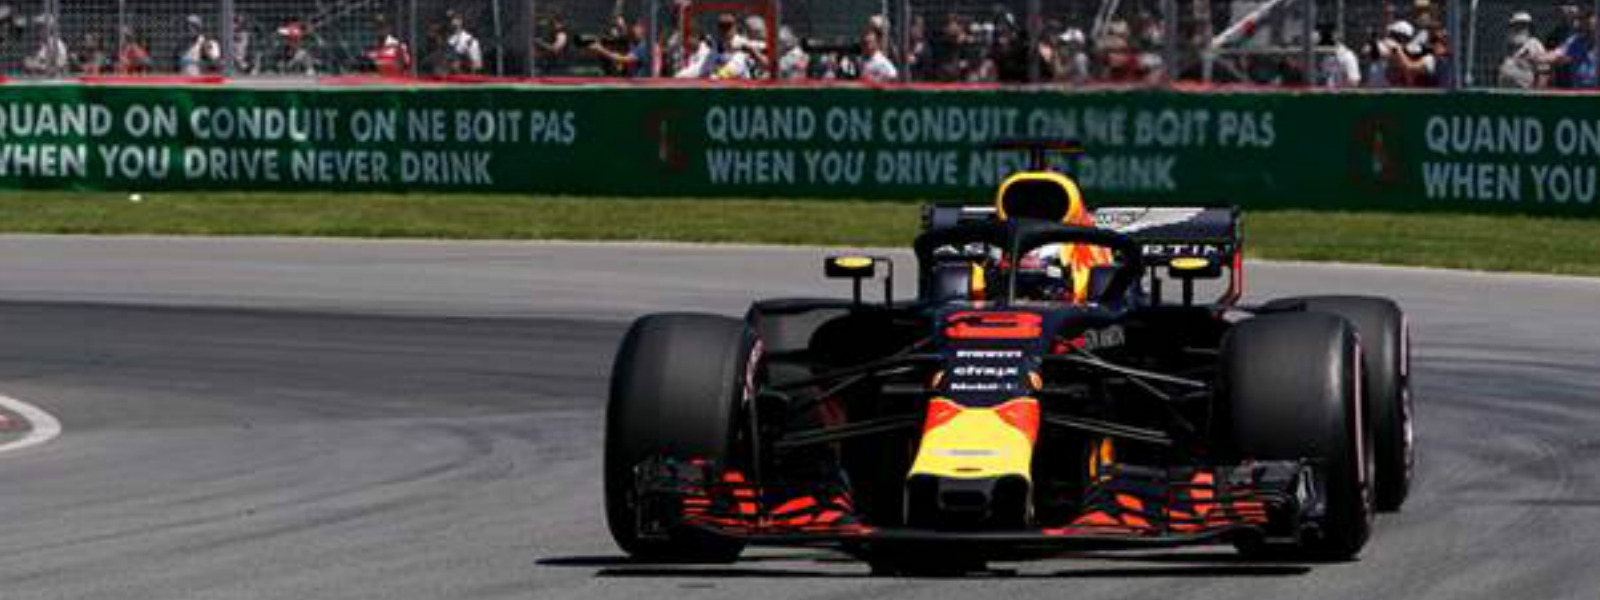 Red Bull F1 team to use Honda engines